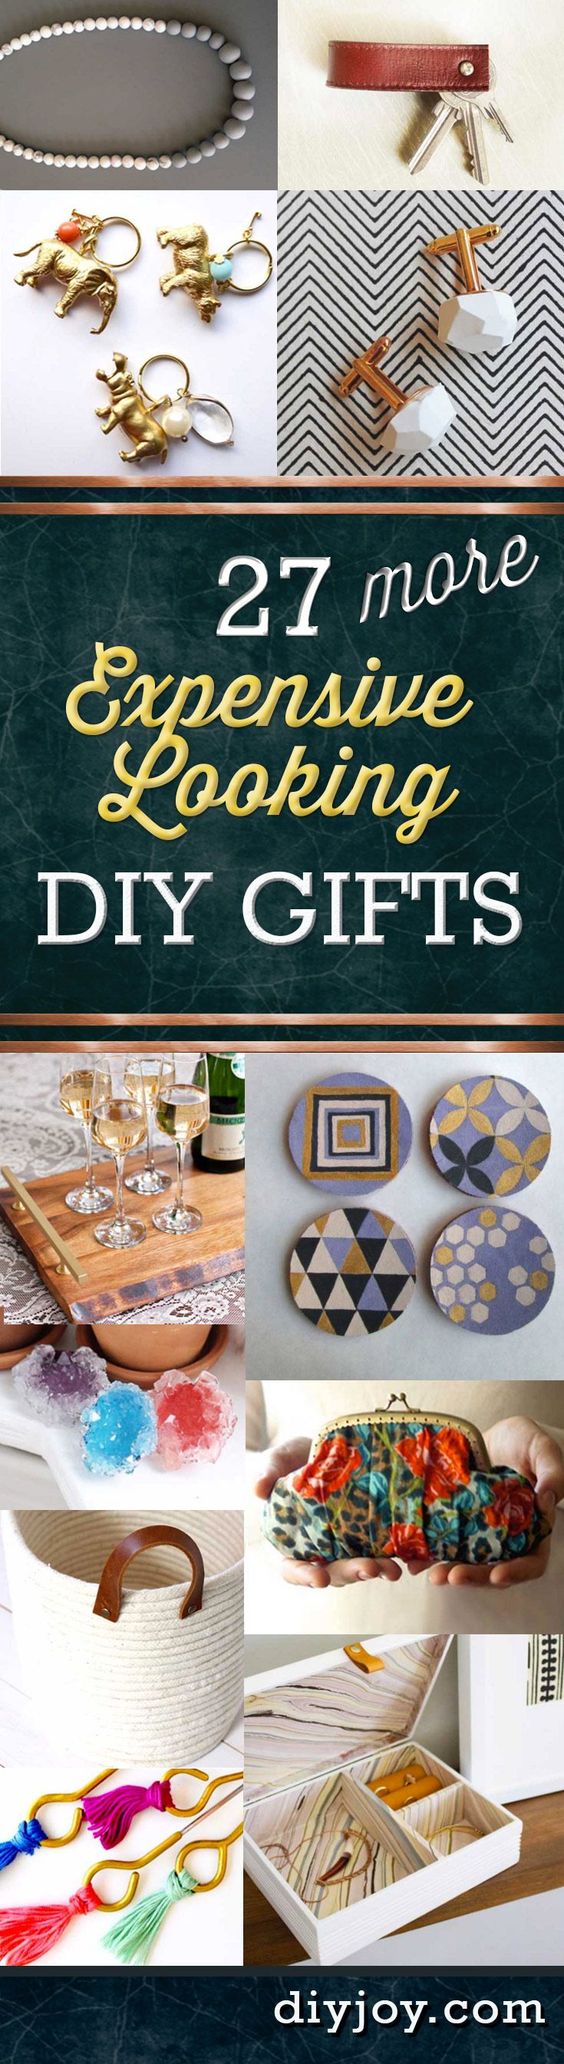 27 MORE Expensive Looking Inexpensive Gifts